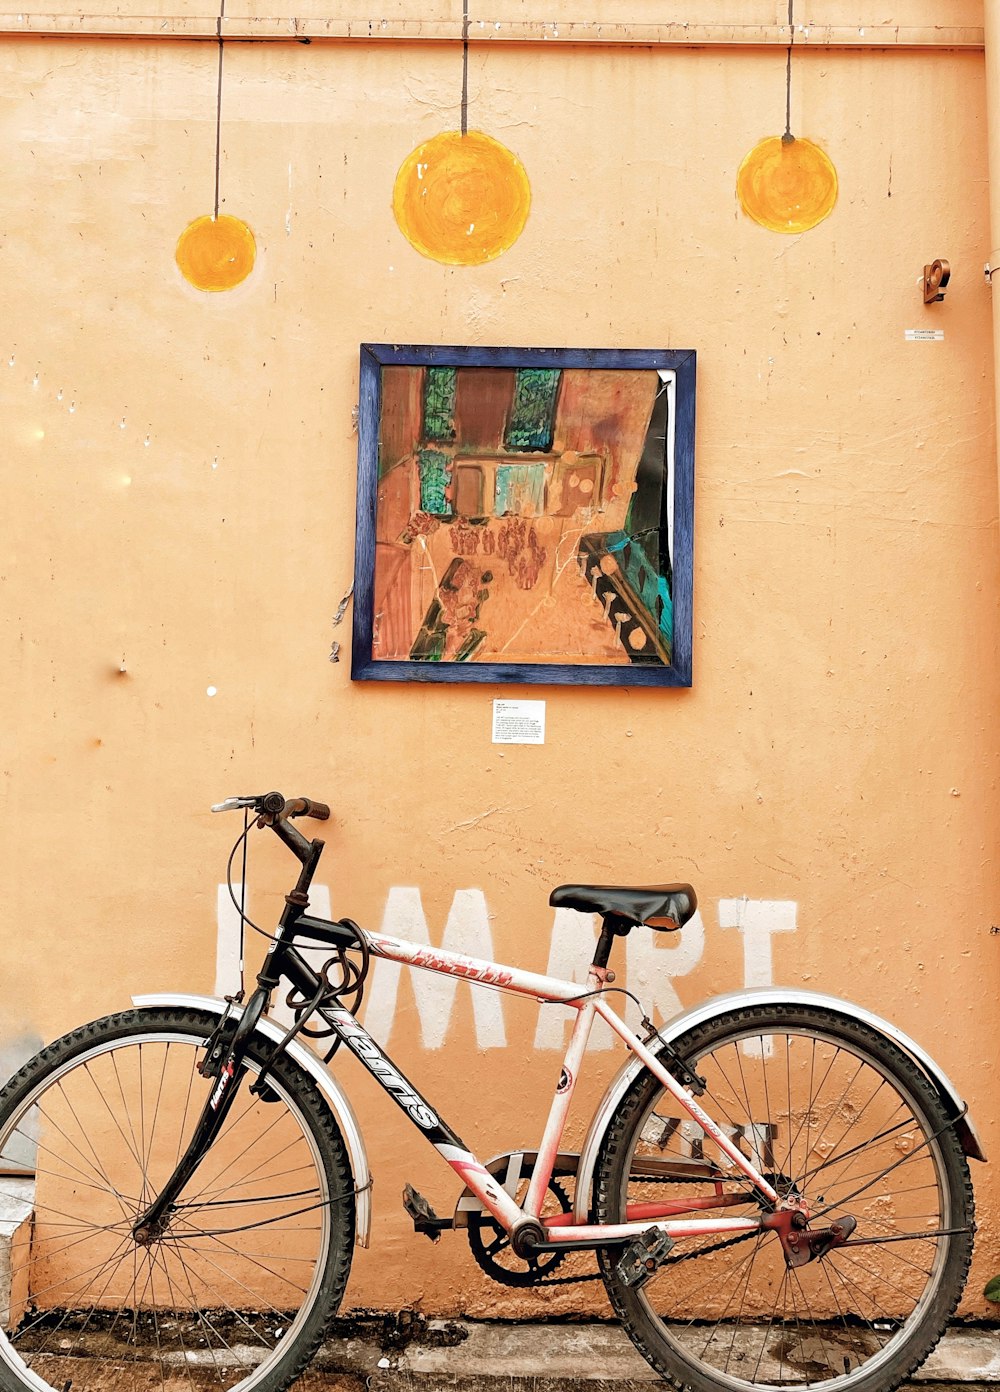 a bicycle is parked in front of a painting on a wall